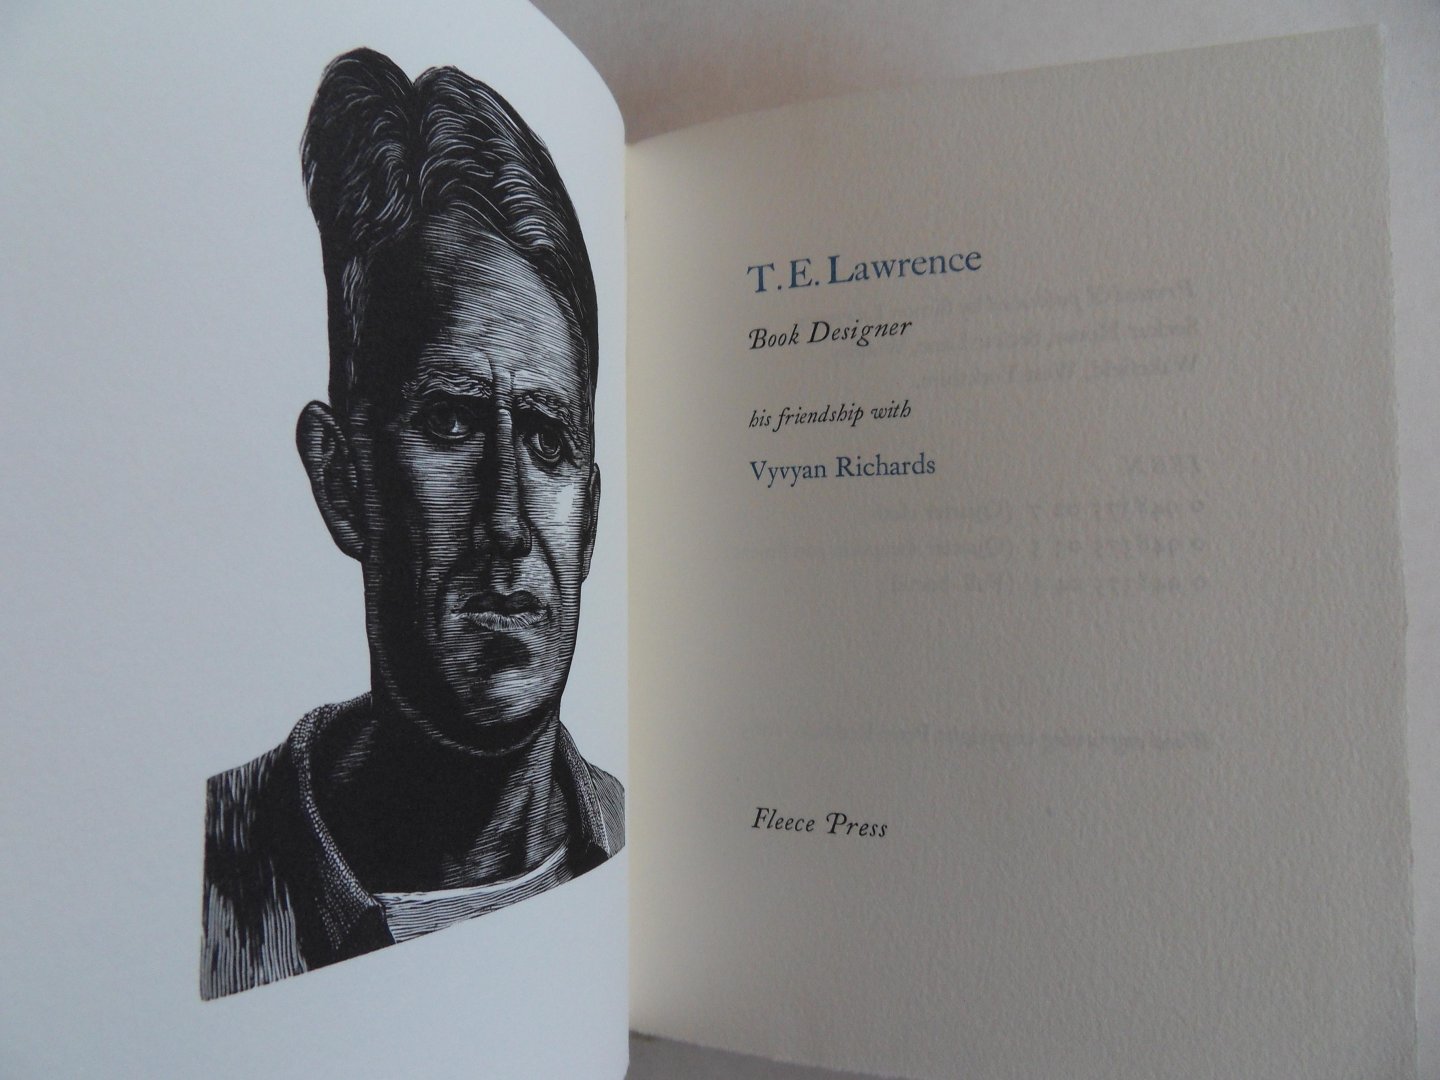 Richards, Vyvyan. [ SIGNED by the artist under the colophon ]. - T.E. Lawrence. - Bookdesigner. [ One of only 50 copies quarter-bound in sheepskin parchment ].